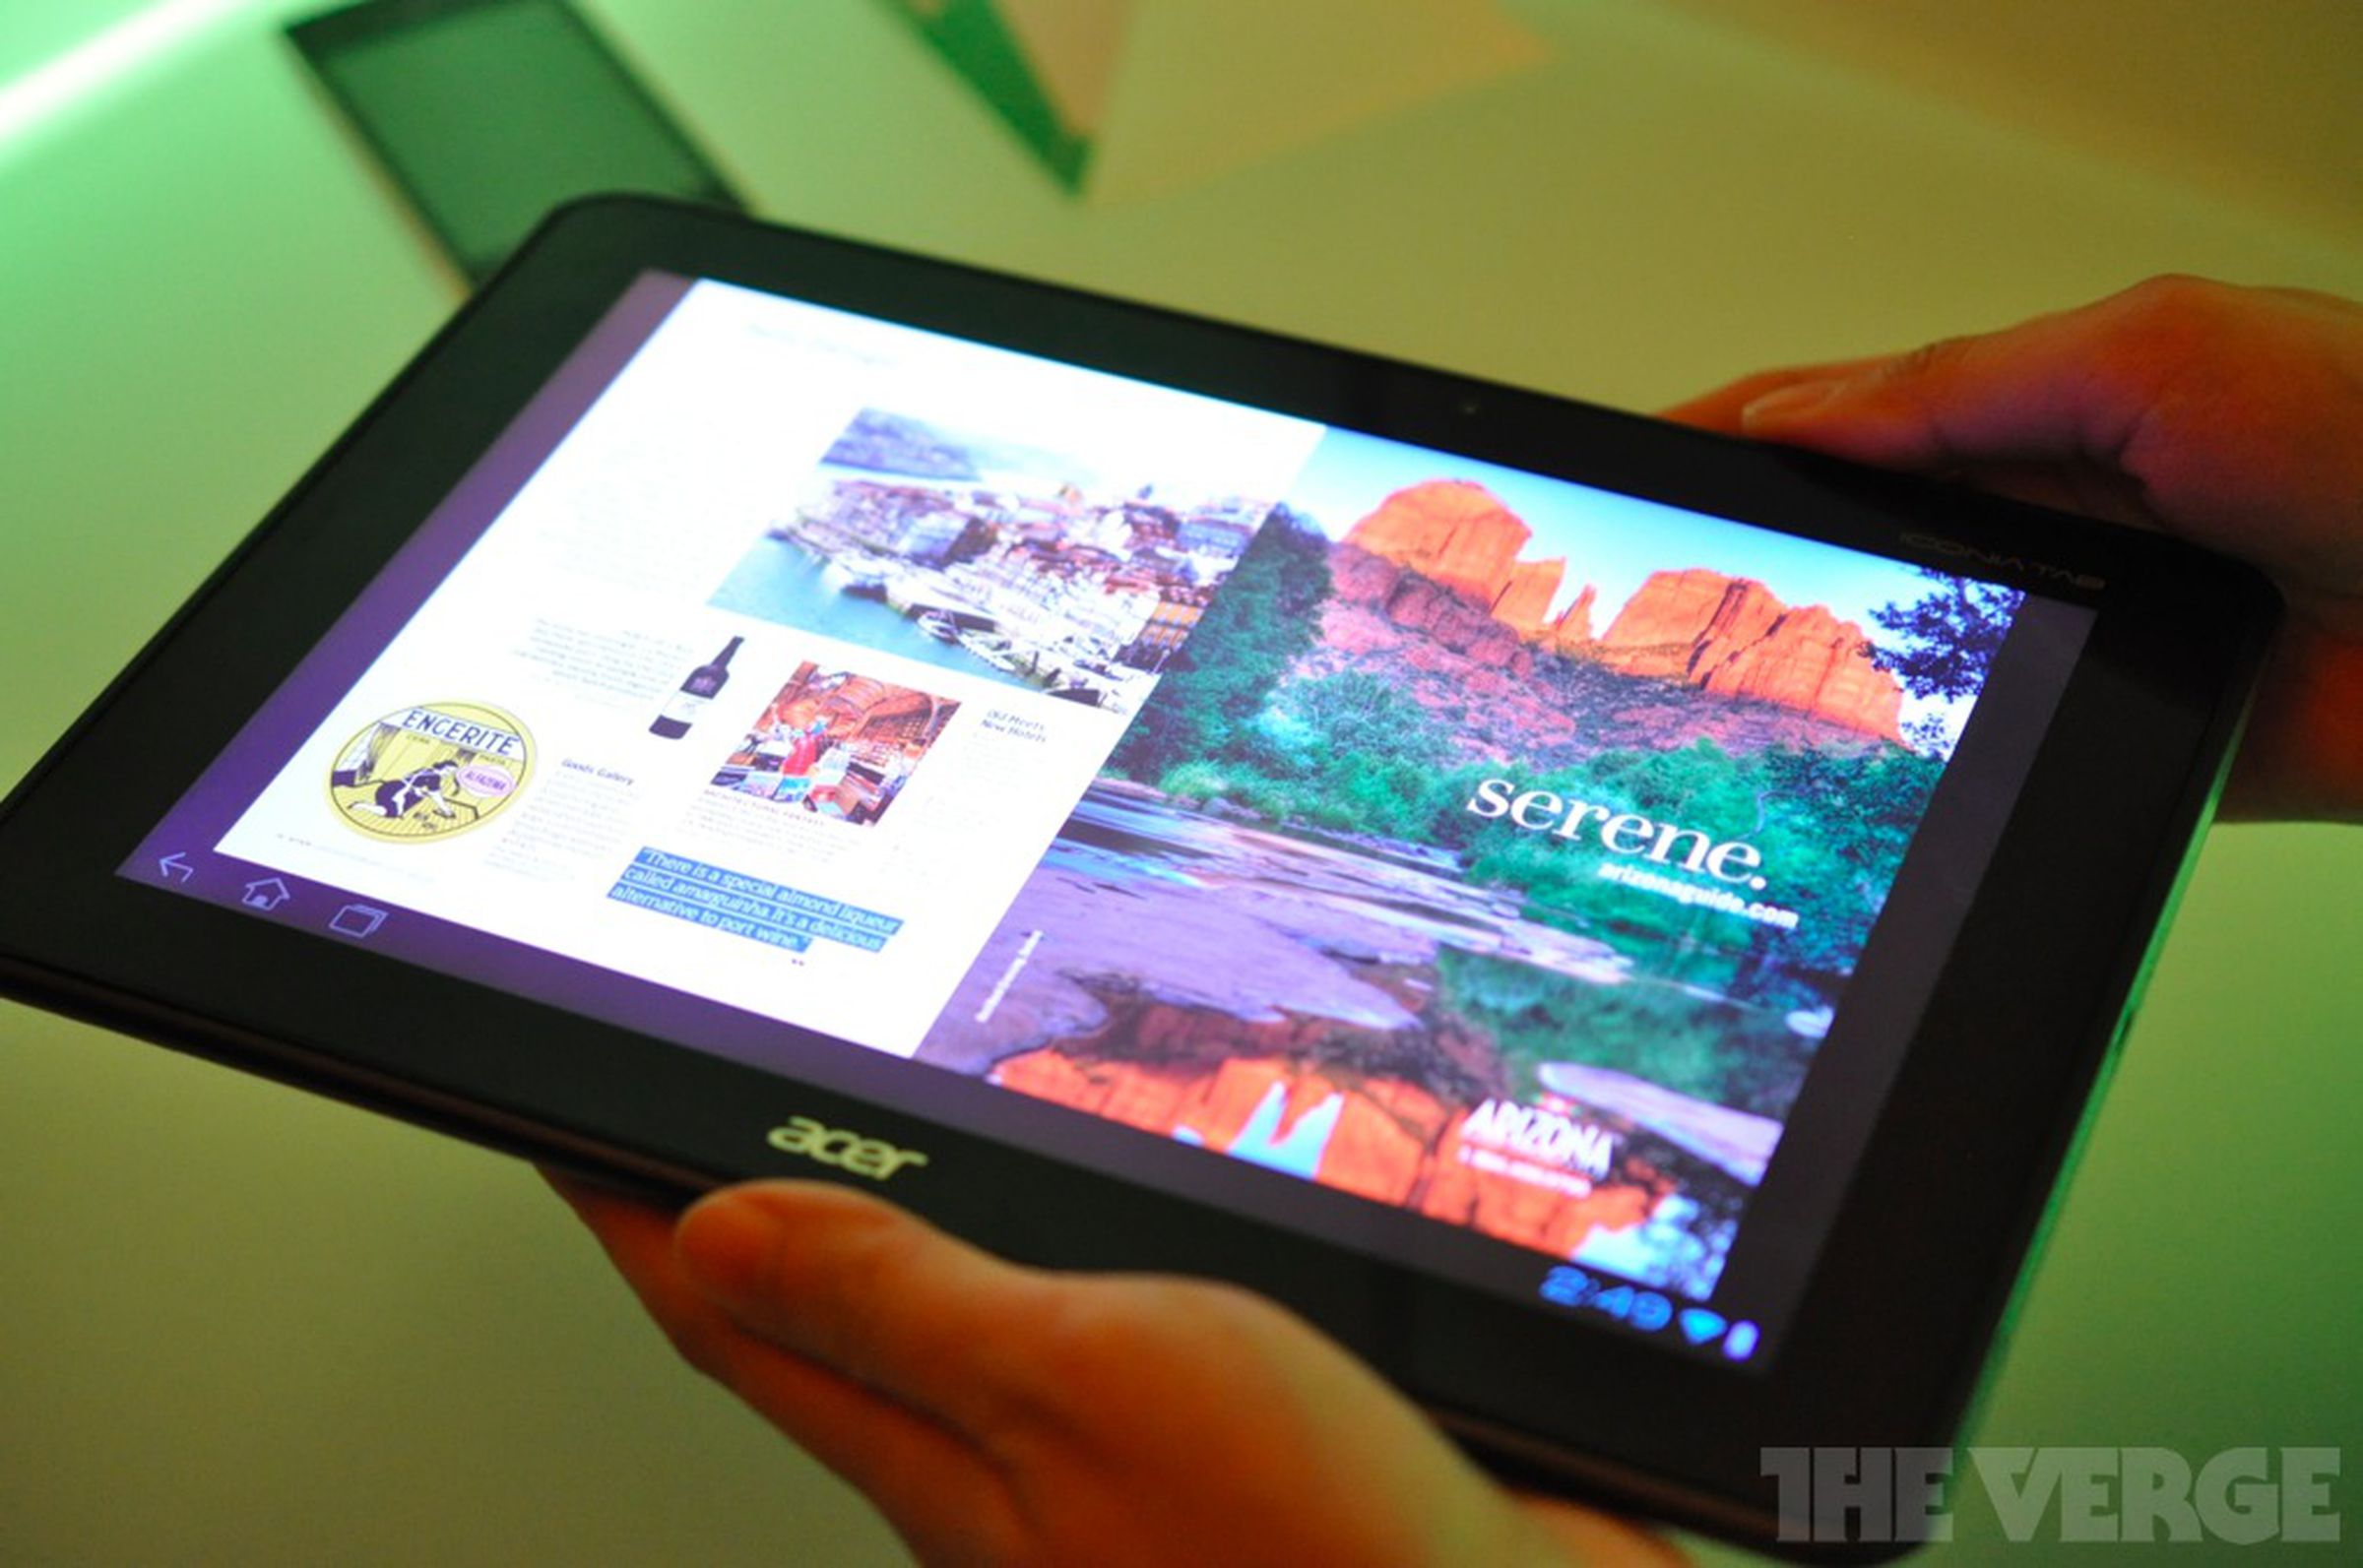 Acer Iconia Tab A700 hands-on photos